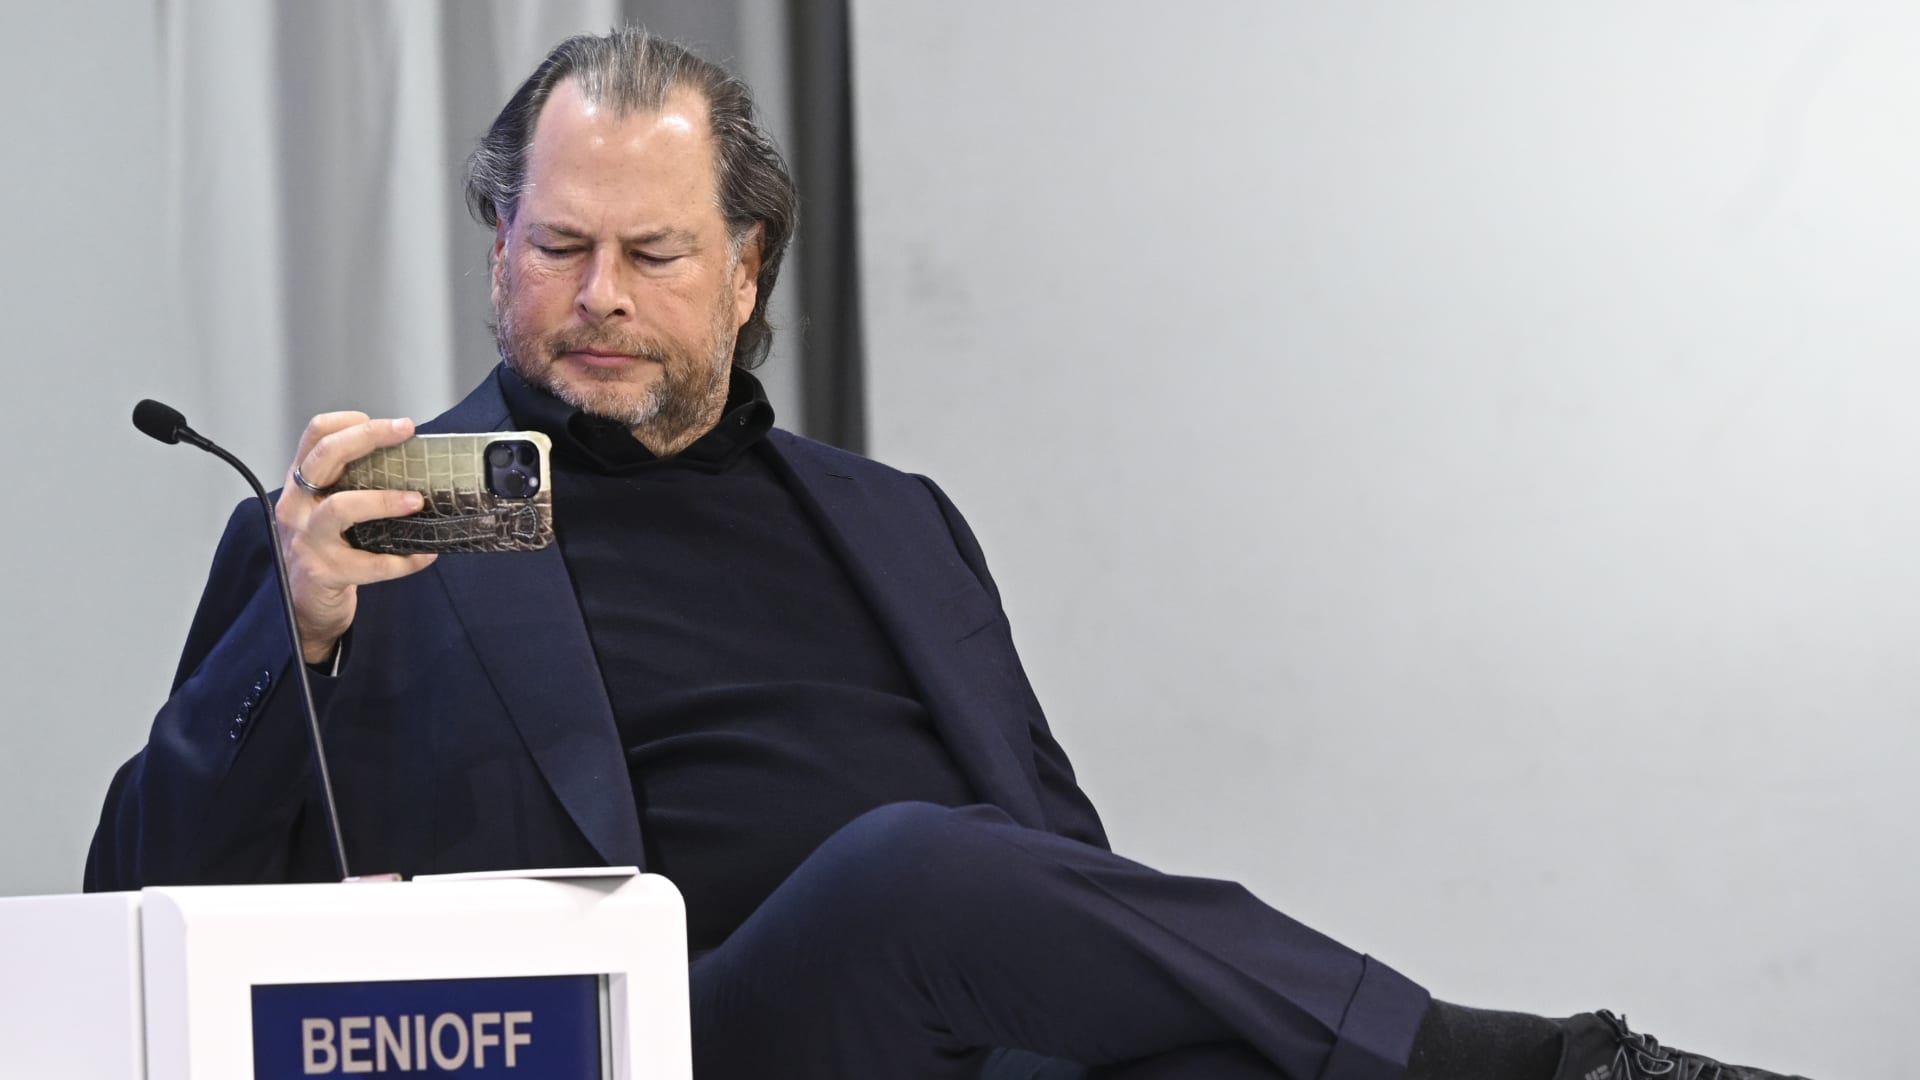 Salesforce shareholders vote against pay for Benioff and top executives